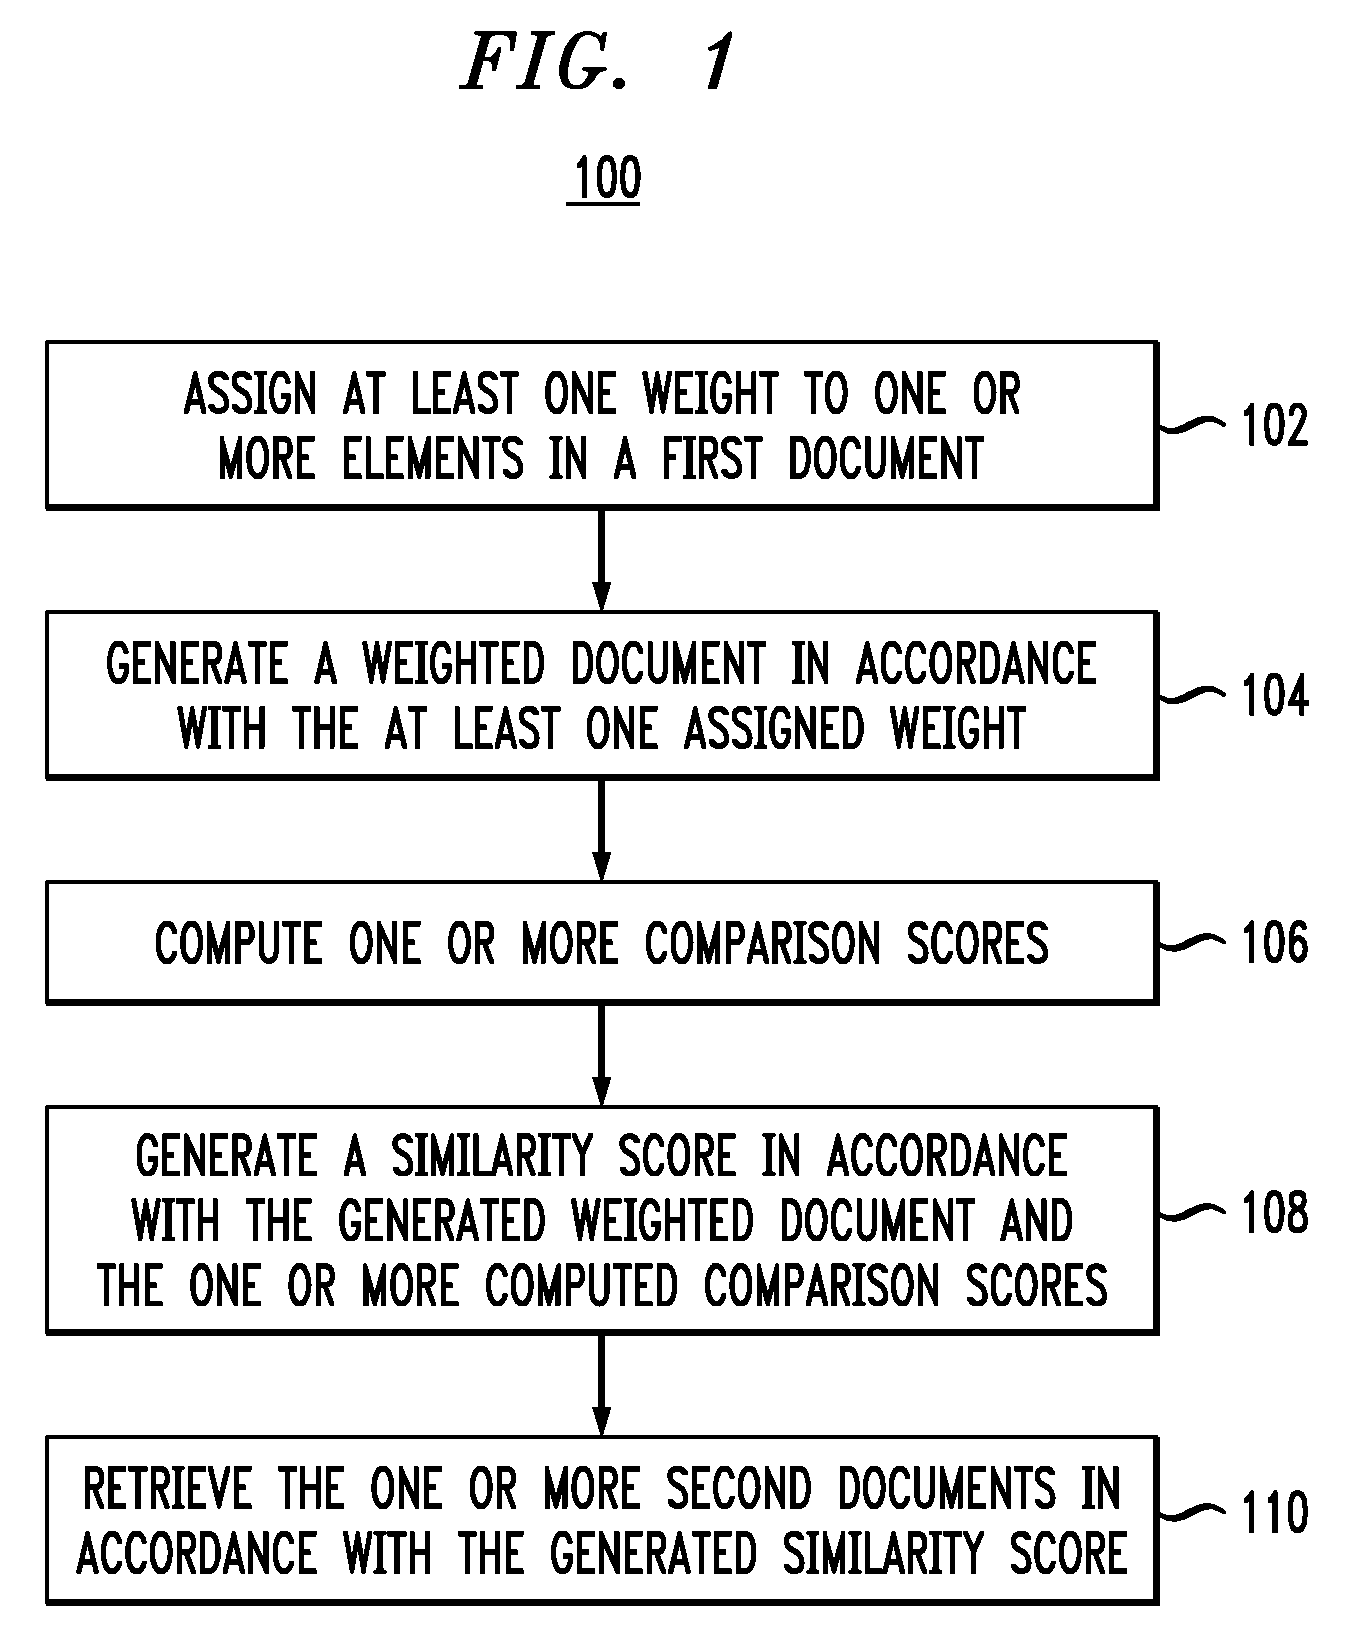 Comparison of Documents Based on Similarity Measures